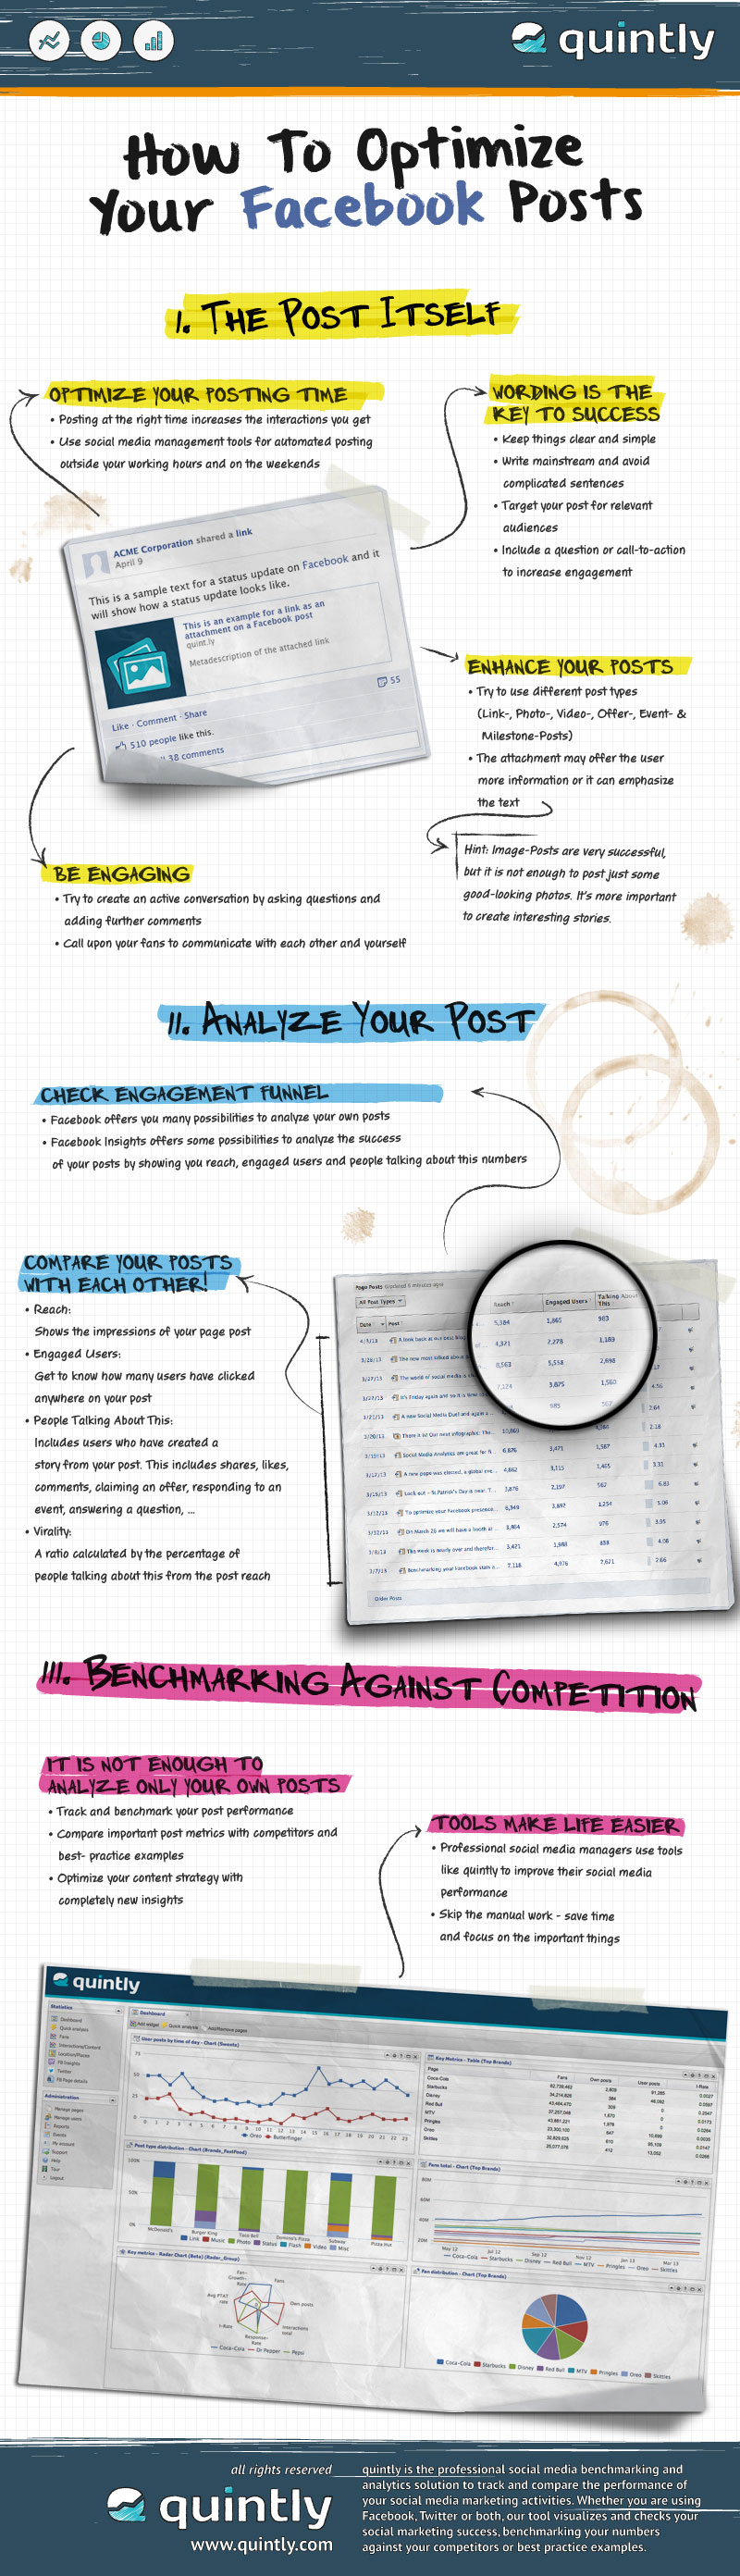 optimize-your-facebook-posts-infographic